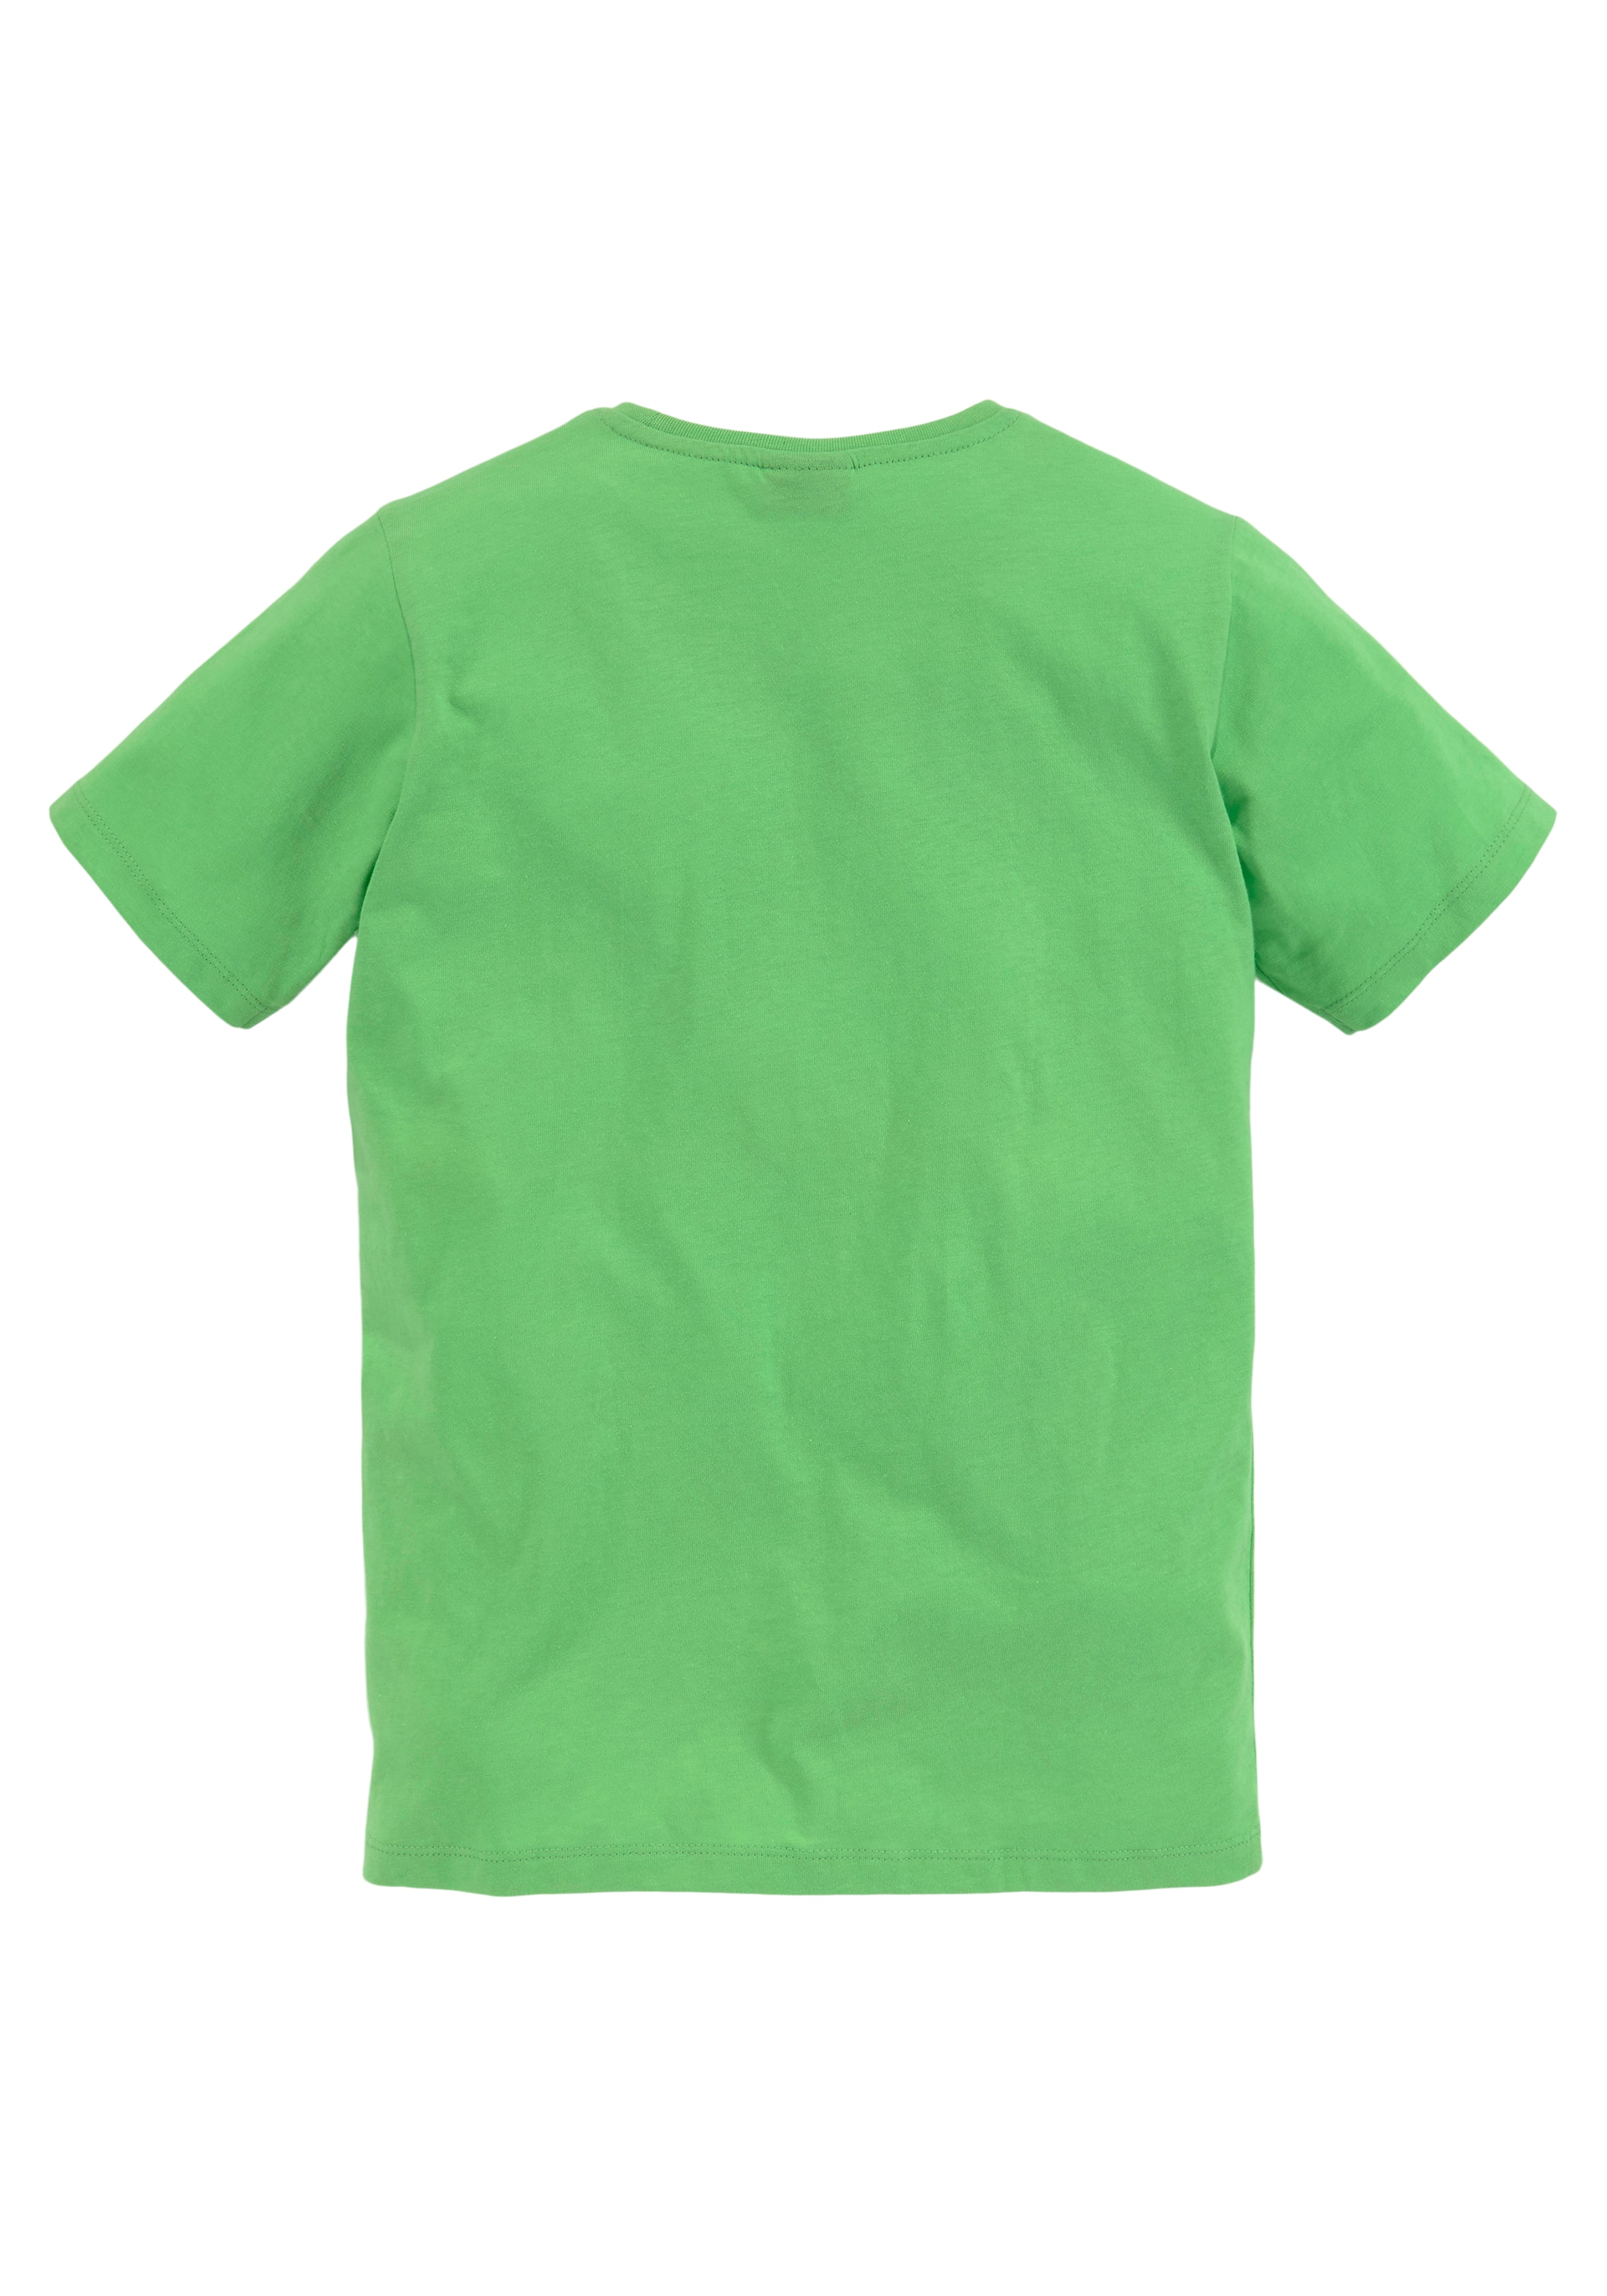 kaufen T-Shirt YOUR »YOUR RULES GAMES« online KIDSWORLD